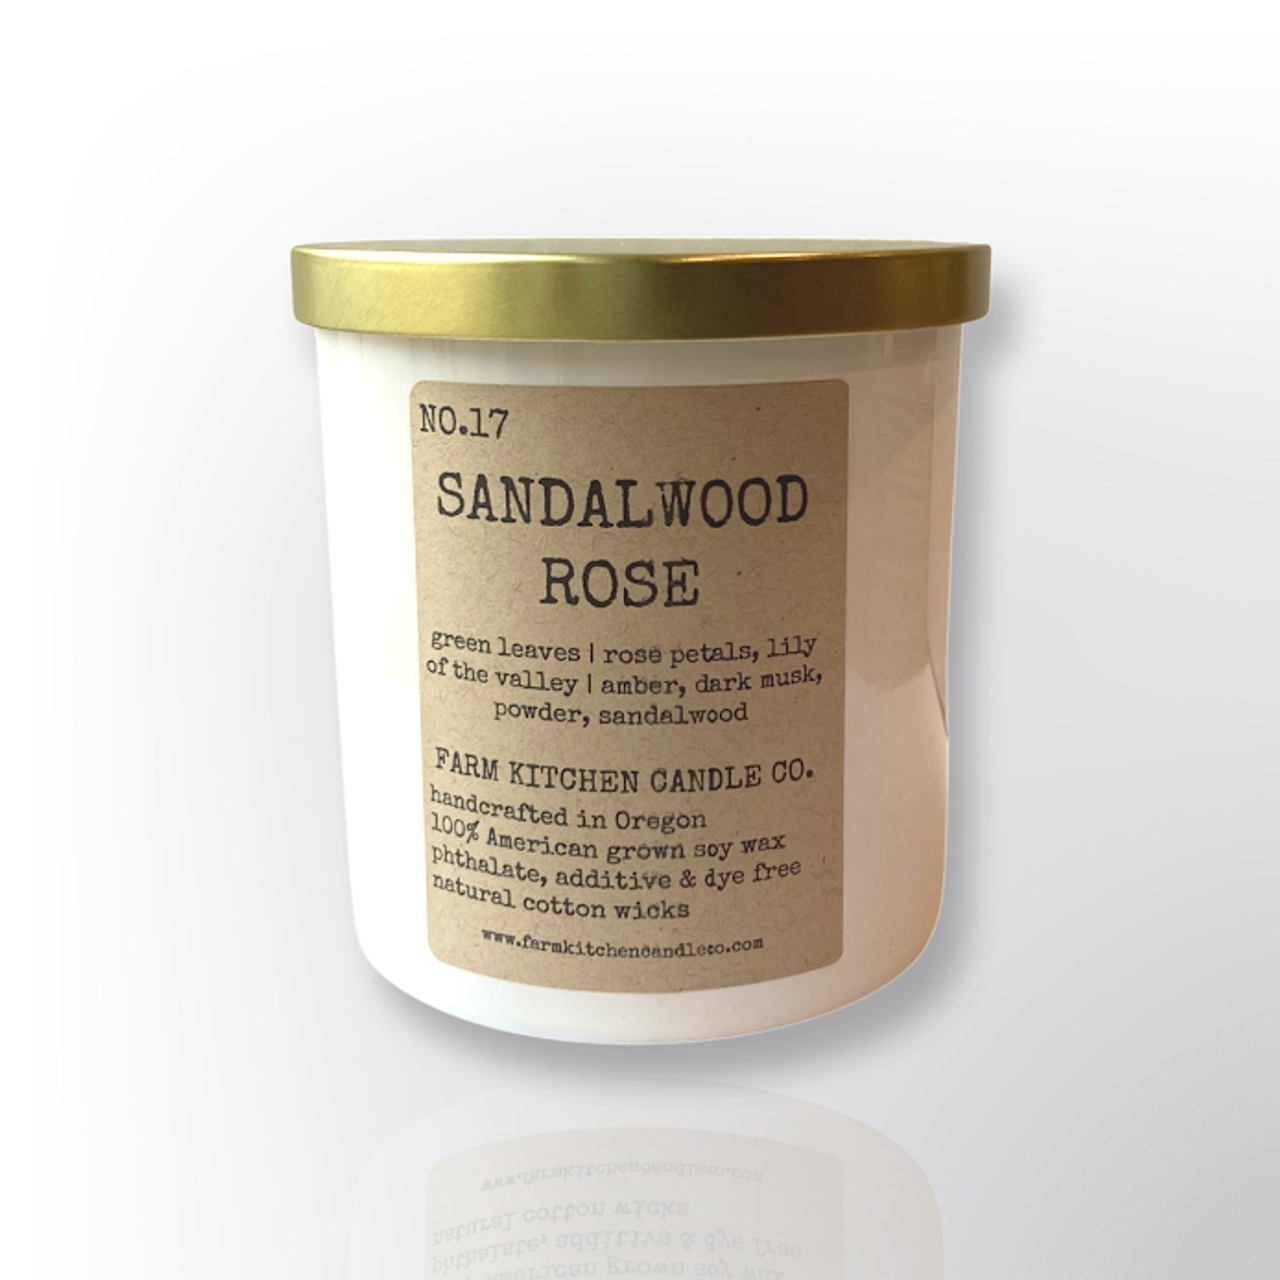 FARM KITCHEN CANDLE CO - SINGLE WICK SOY CANDLE IN SANDALWOOD ROSE